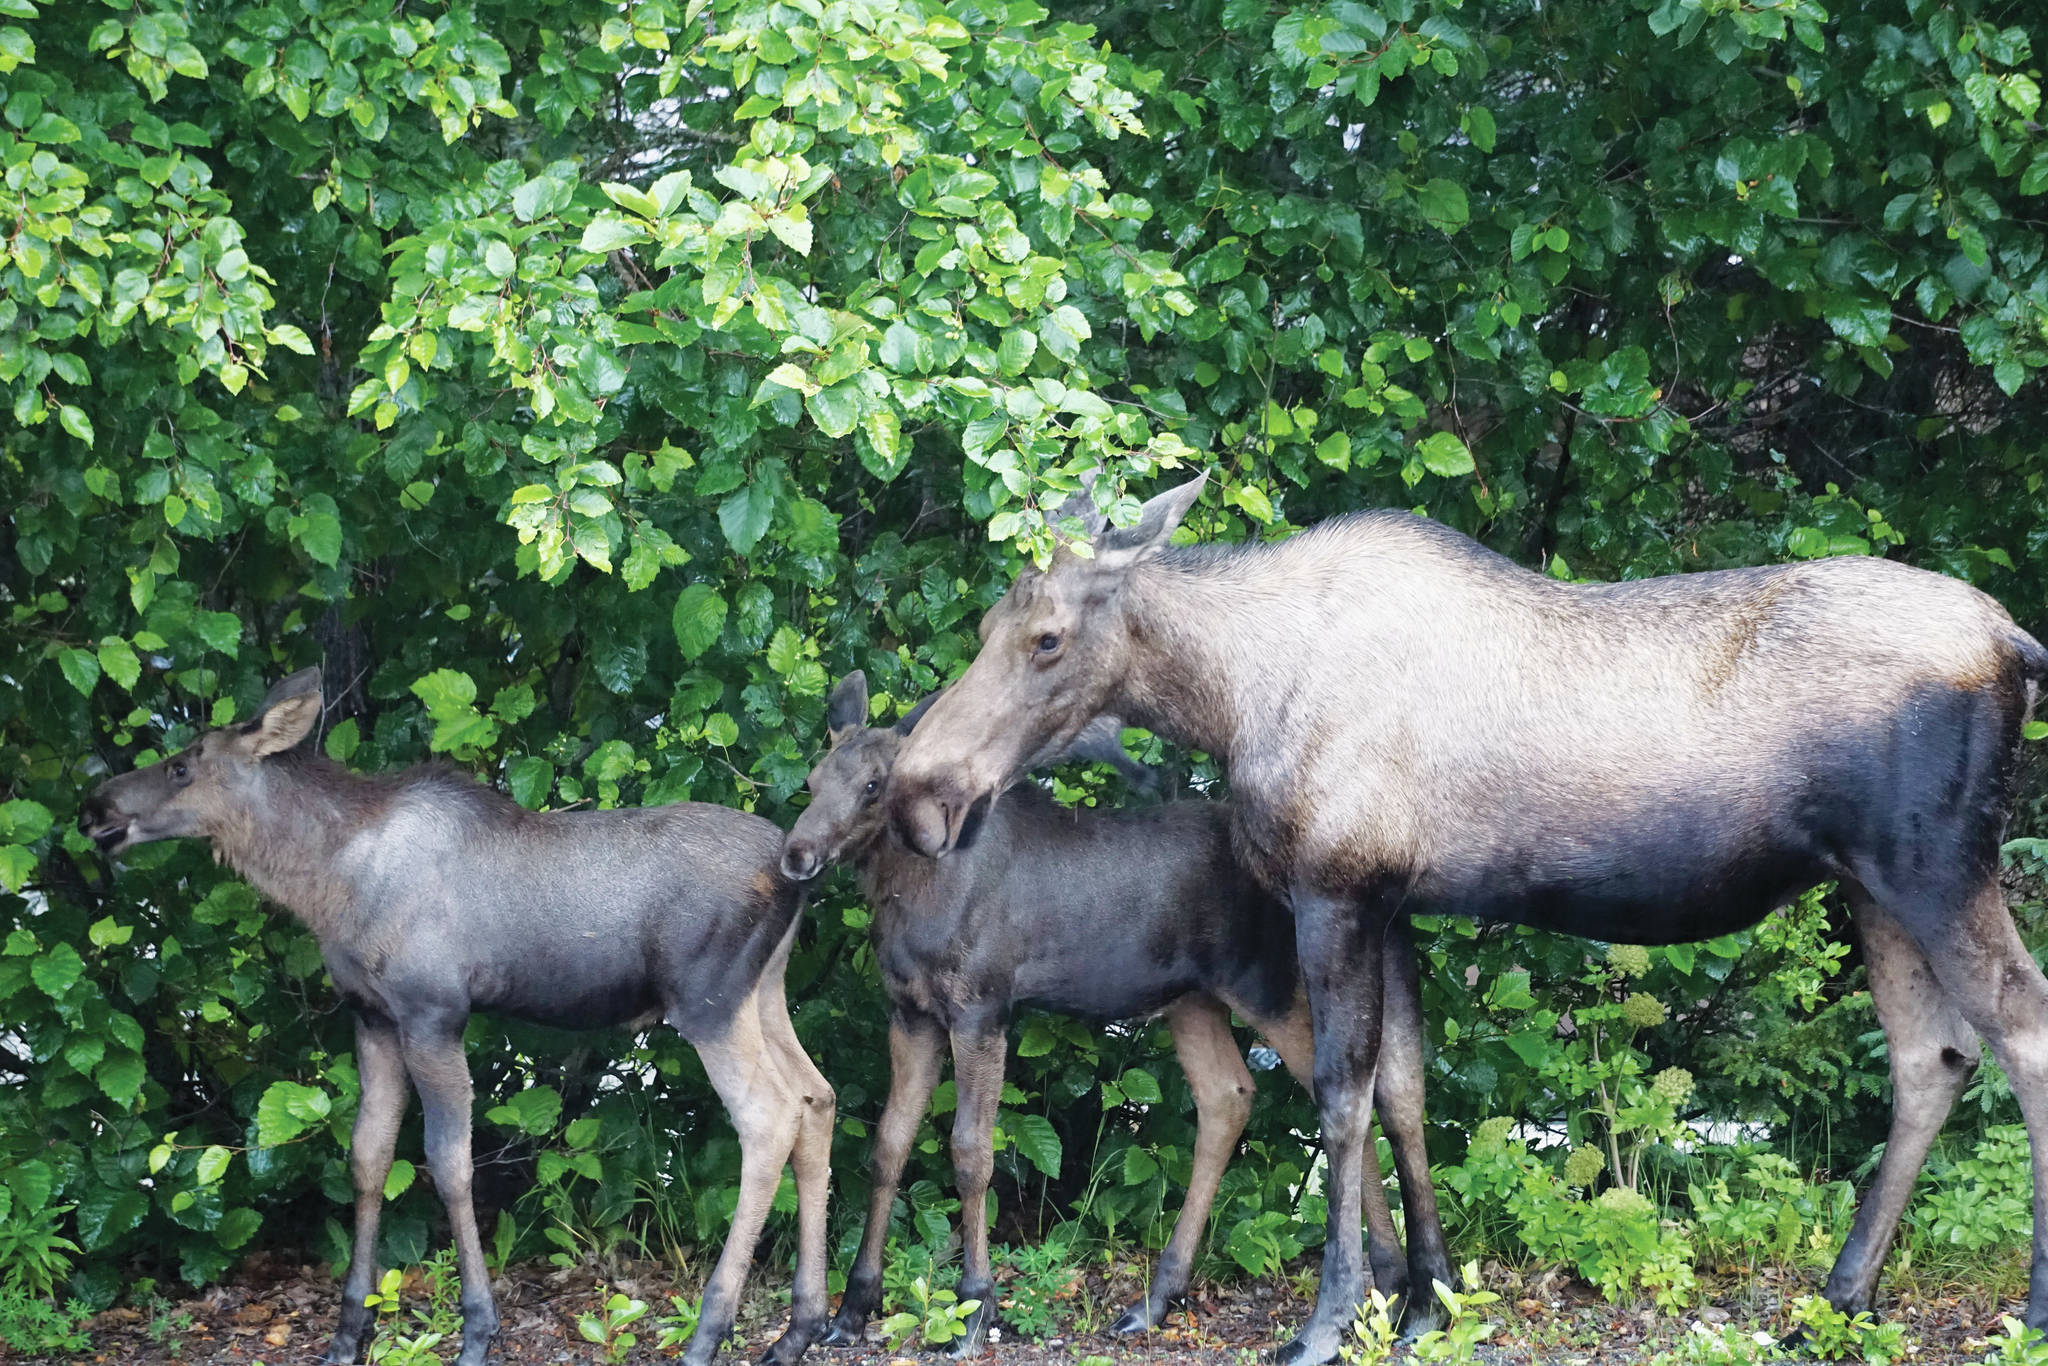 A cow moose and her two calves feed on alder bushes on Thursday, July 21, 2021, in the Homer News parking lot in Homer, Alaska. (Photo by Michael Armstrong/Homer News)